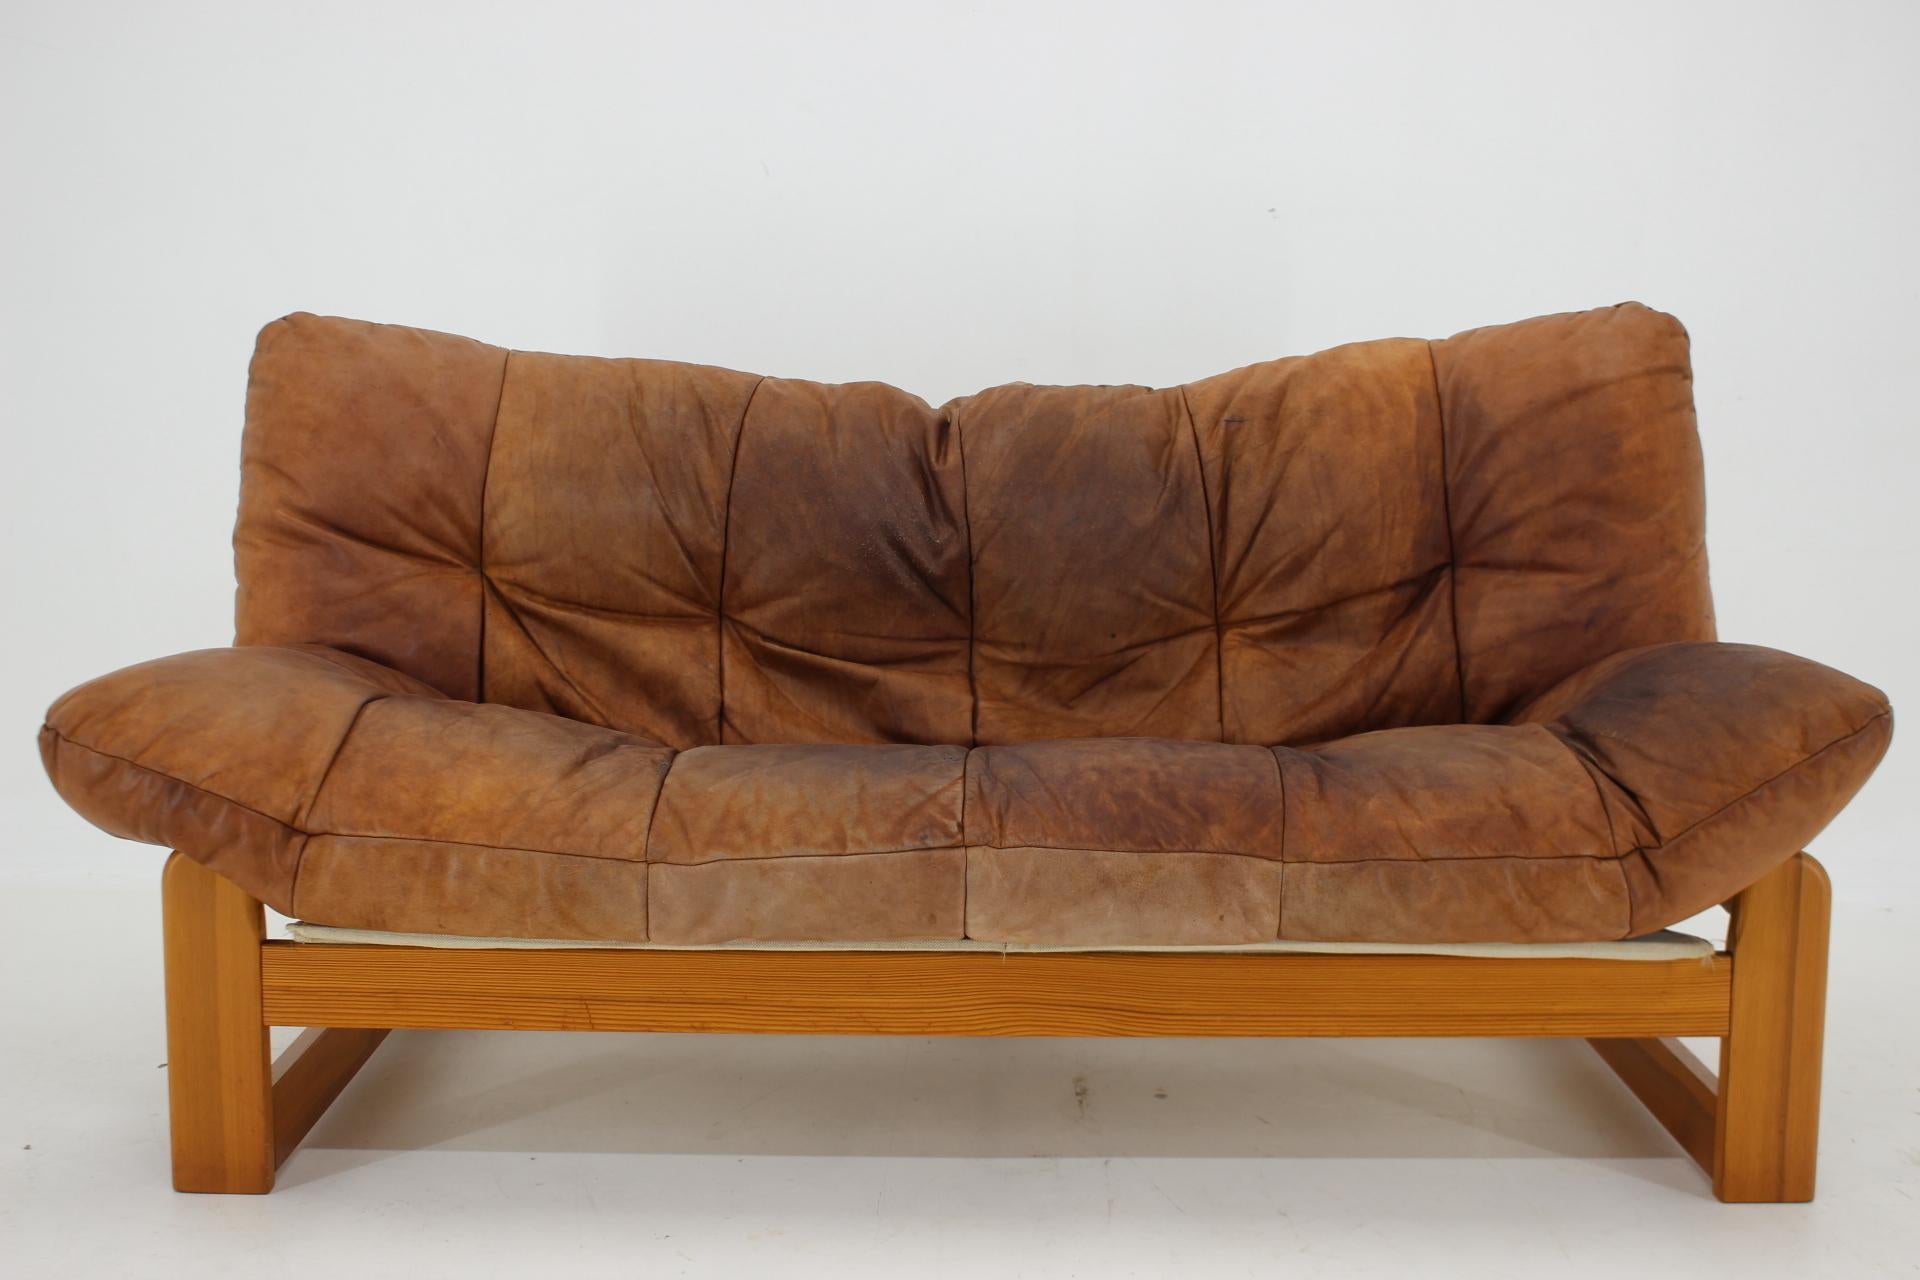 - good original condition 
- sturdy and stable 
- Patinated leather in good condition 
- Very comfortable
- height of seat 40 cm